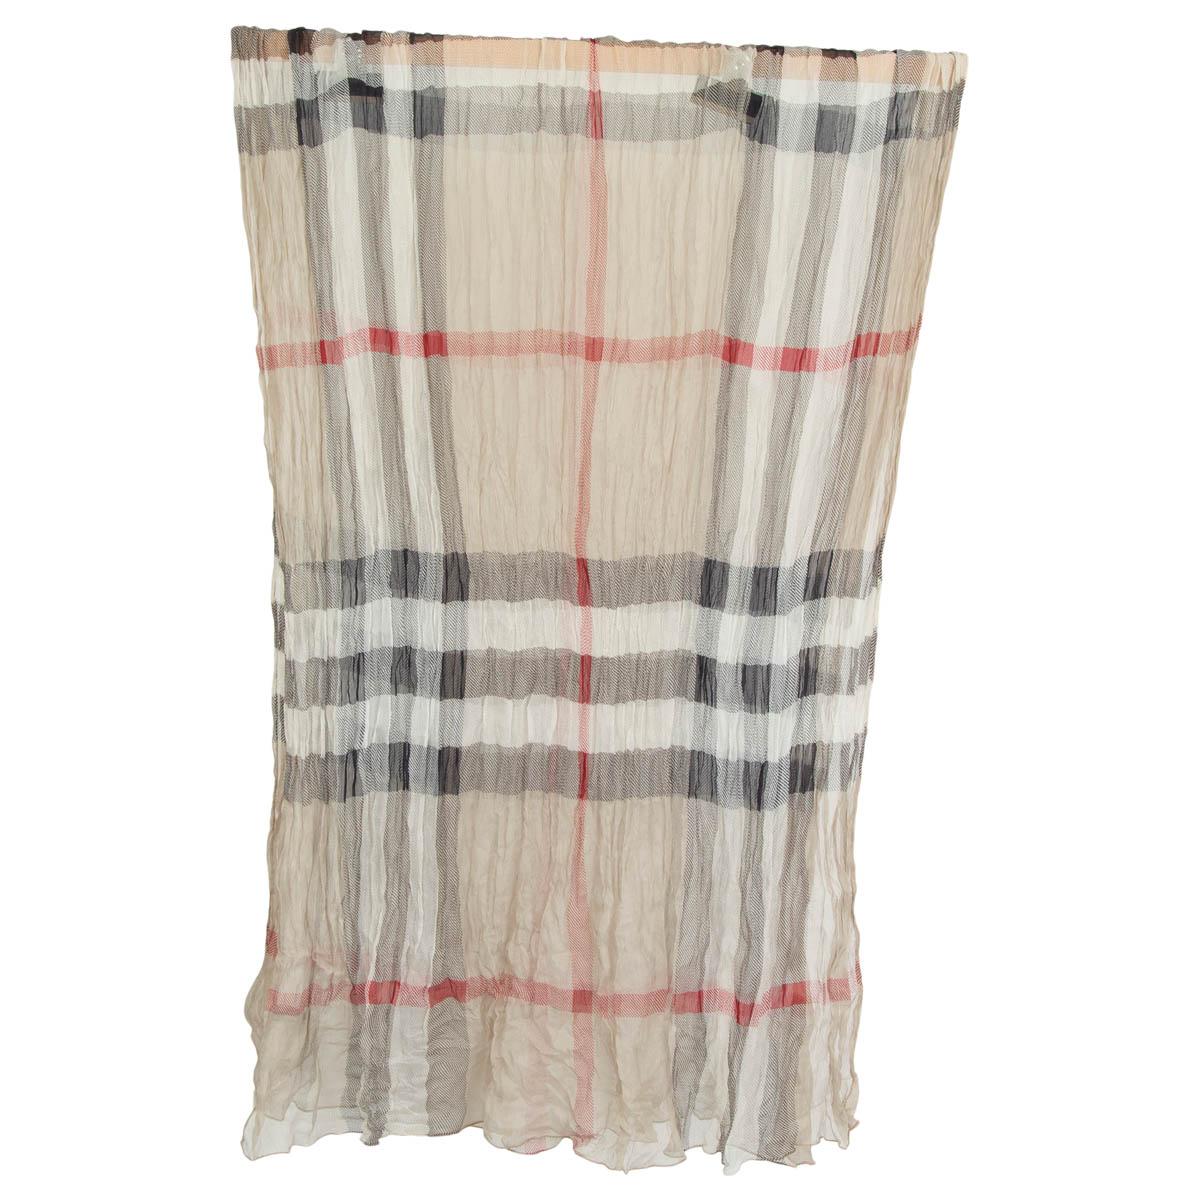 100% authentic Burberry lightweight crinkle scarf in light gray silk (assumed cause tag is missing). Has the classic Burberry check print. Has been worn and is in excellent condition.

Measurements
Width	60cm (23.4in)
Height	200cm (78in)

All our